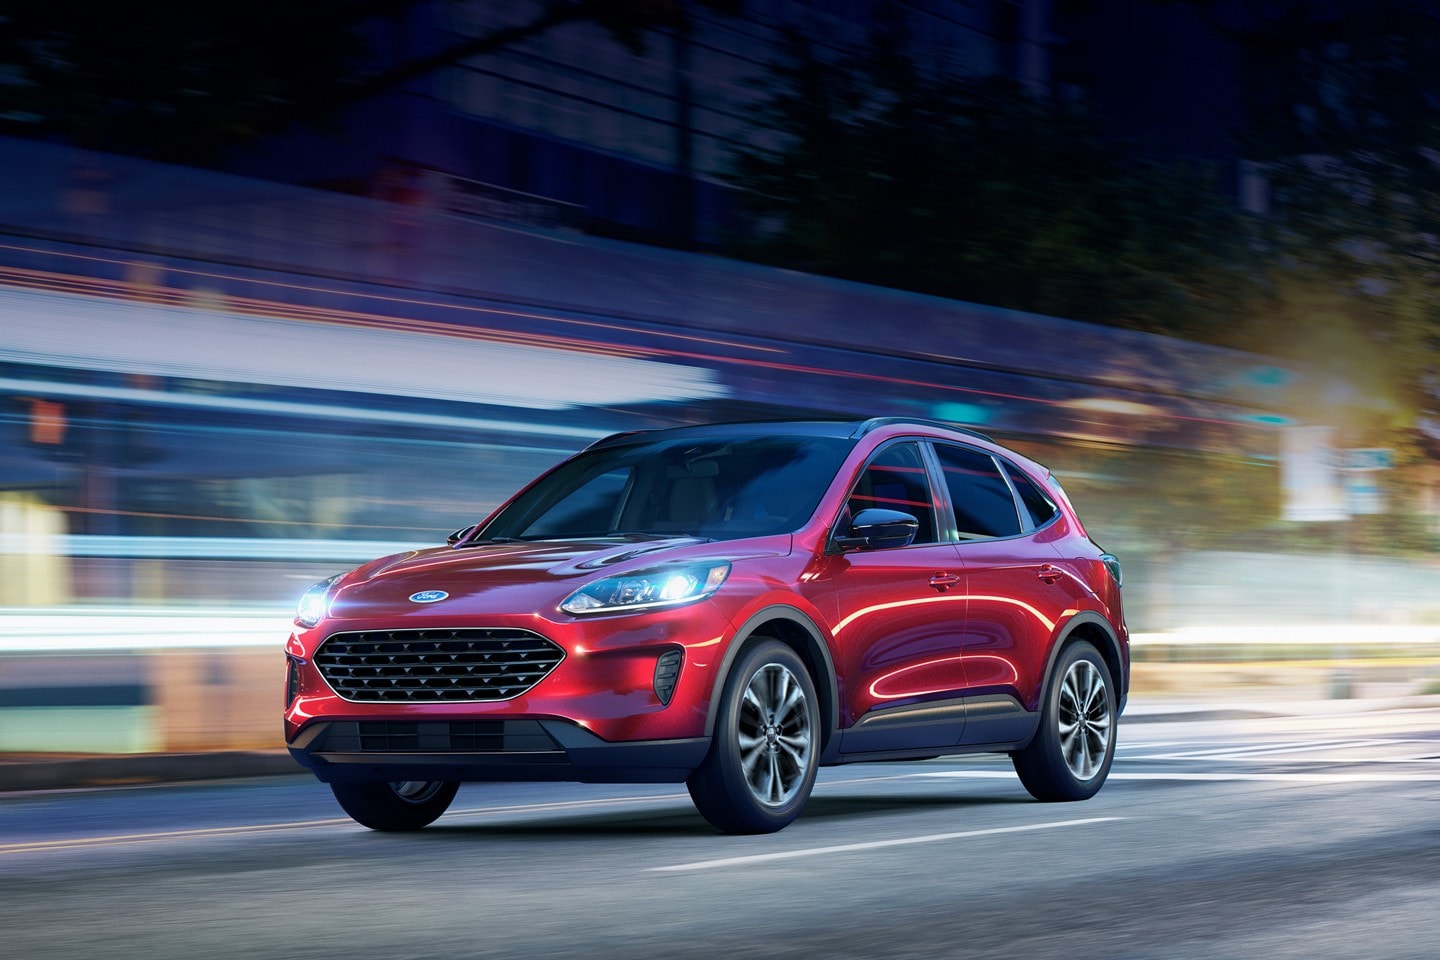 A 2022 Ford Escape on a city street at night